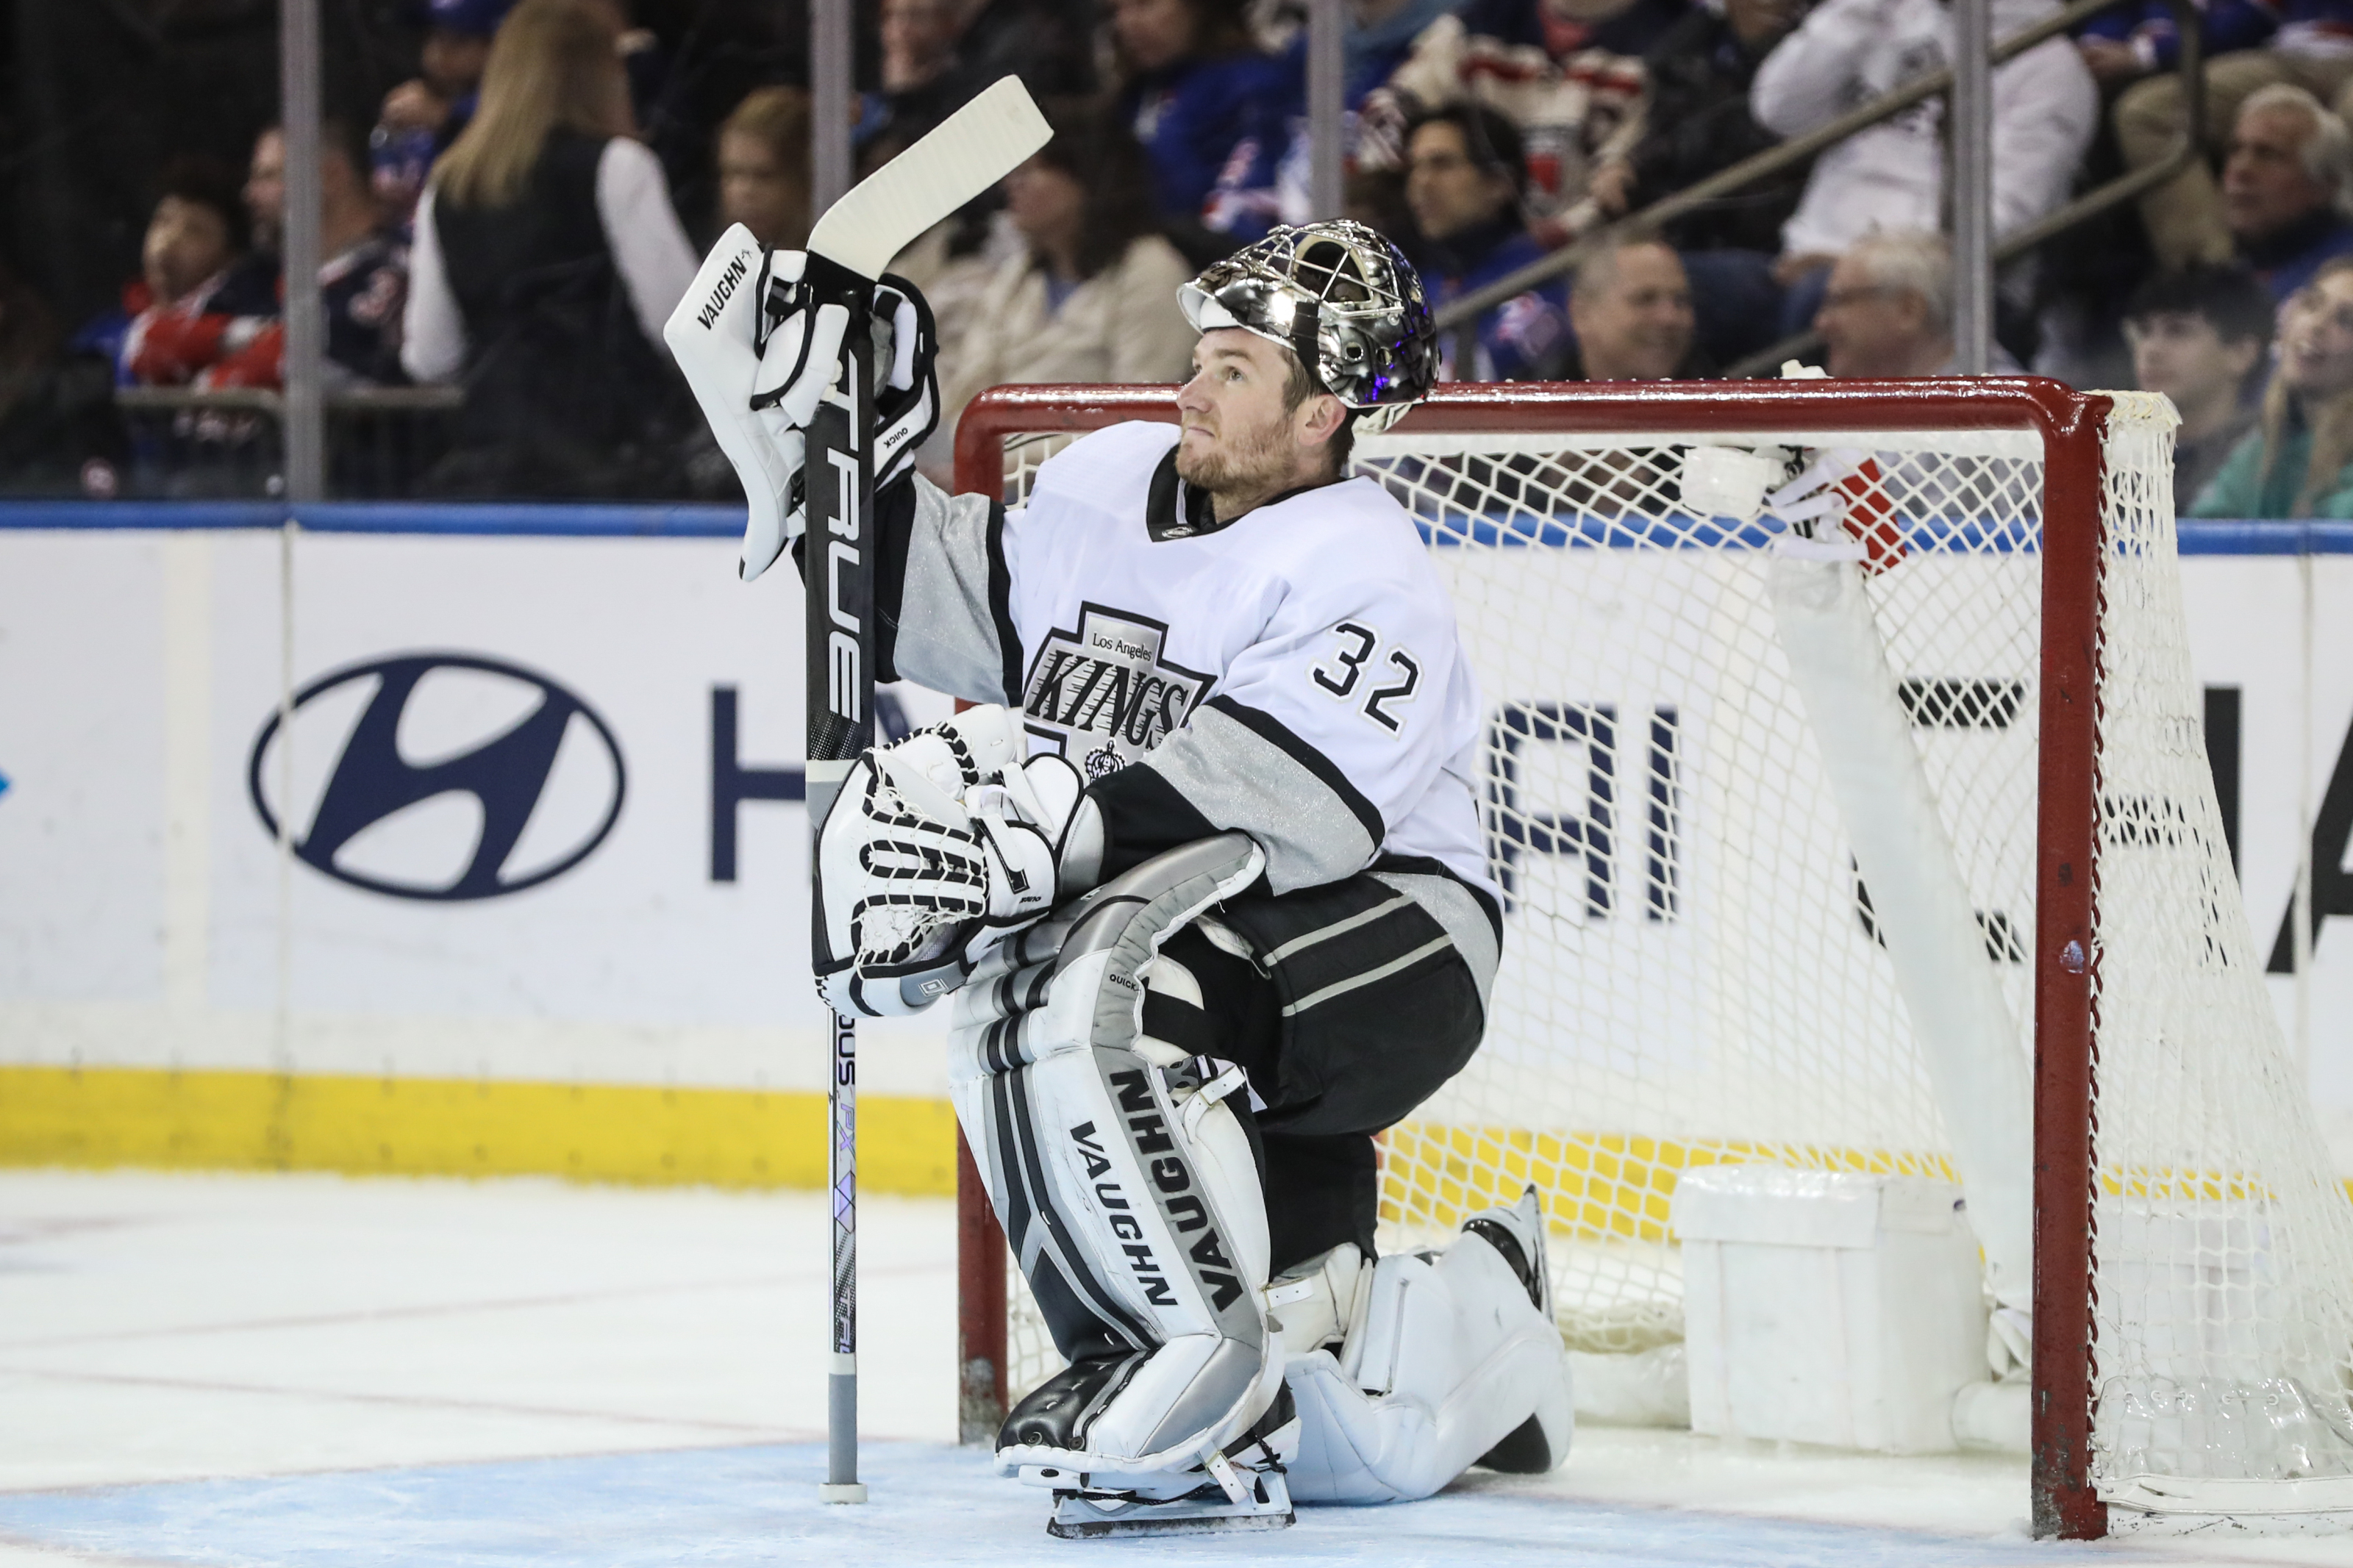 Rangers signing goalie Jonathan Quick in NHL free agency